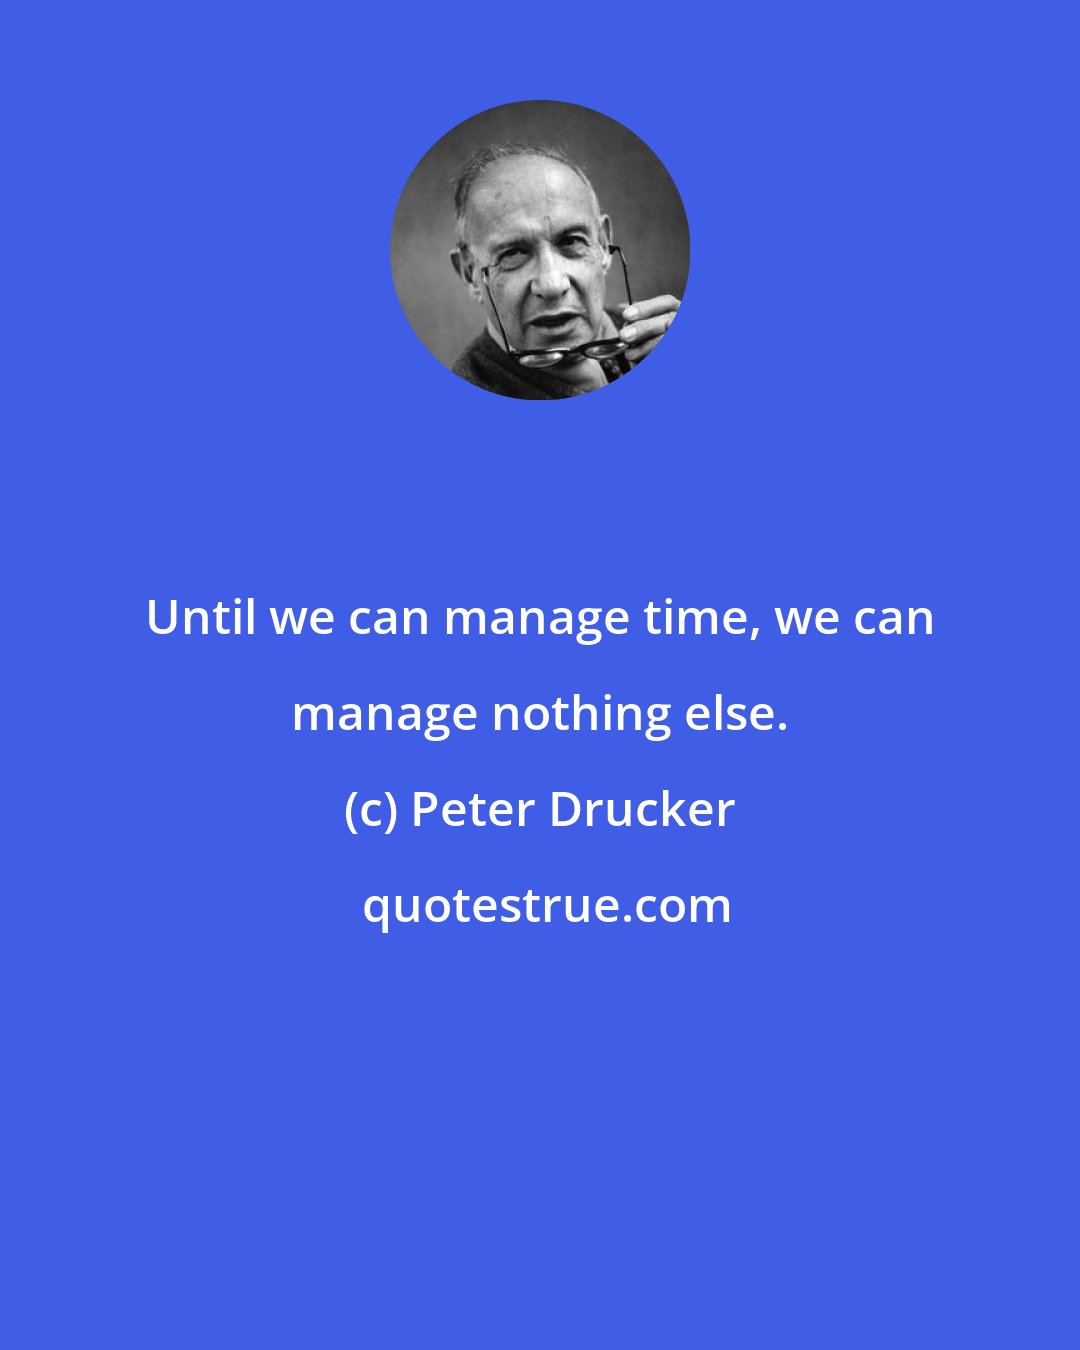 Peter Drucker: Until we can manage time, we can manage nothing else.